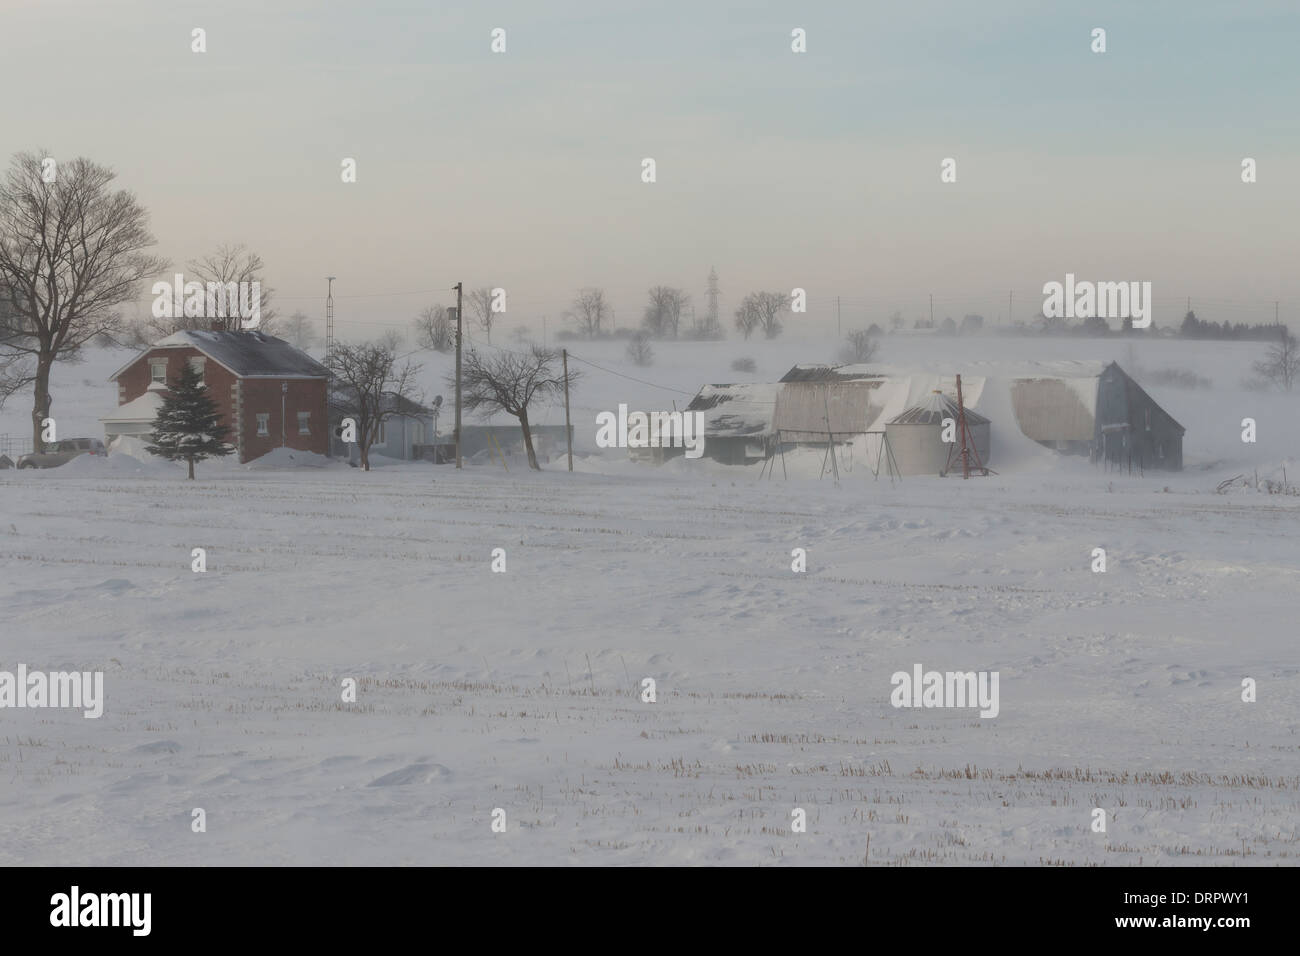 Wind whipped blown snow envelops a farm during a ground blizzard during extreme cold winter weather Stock Photo